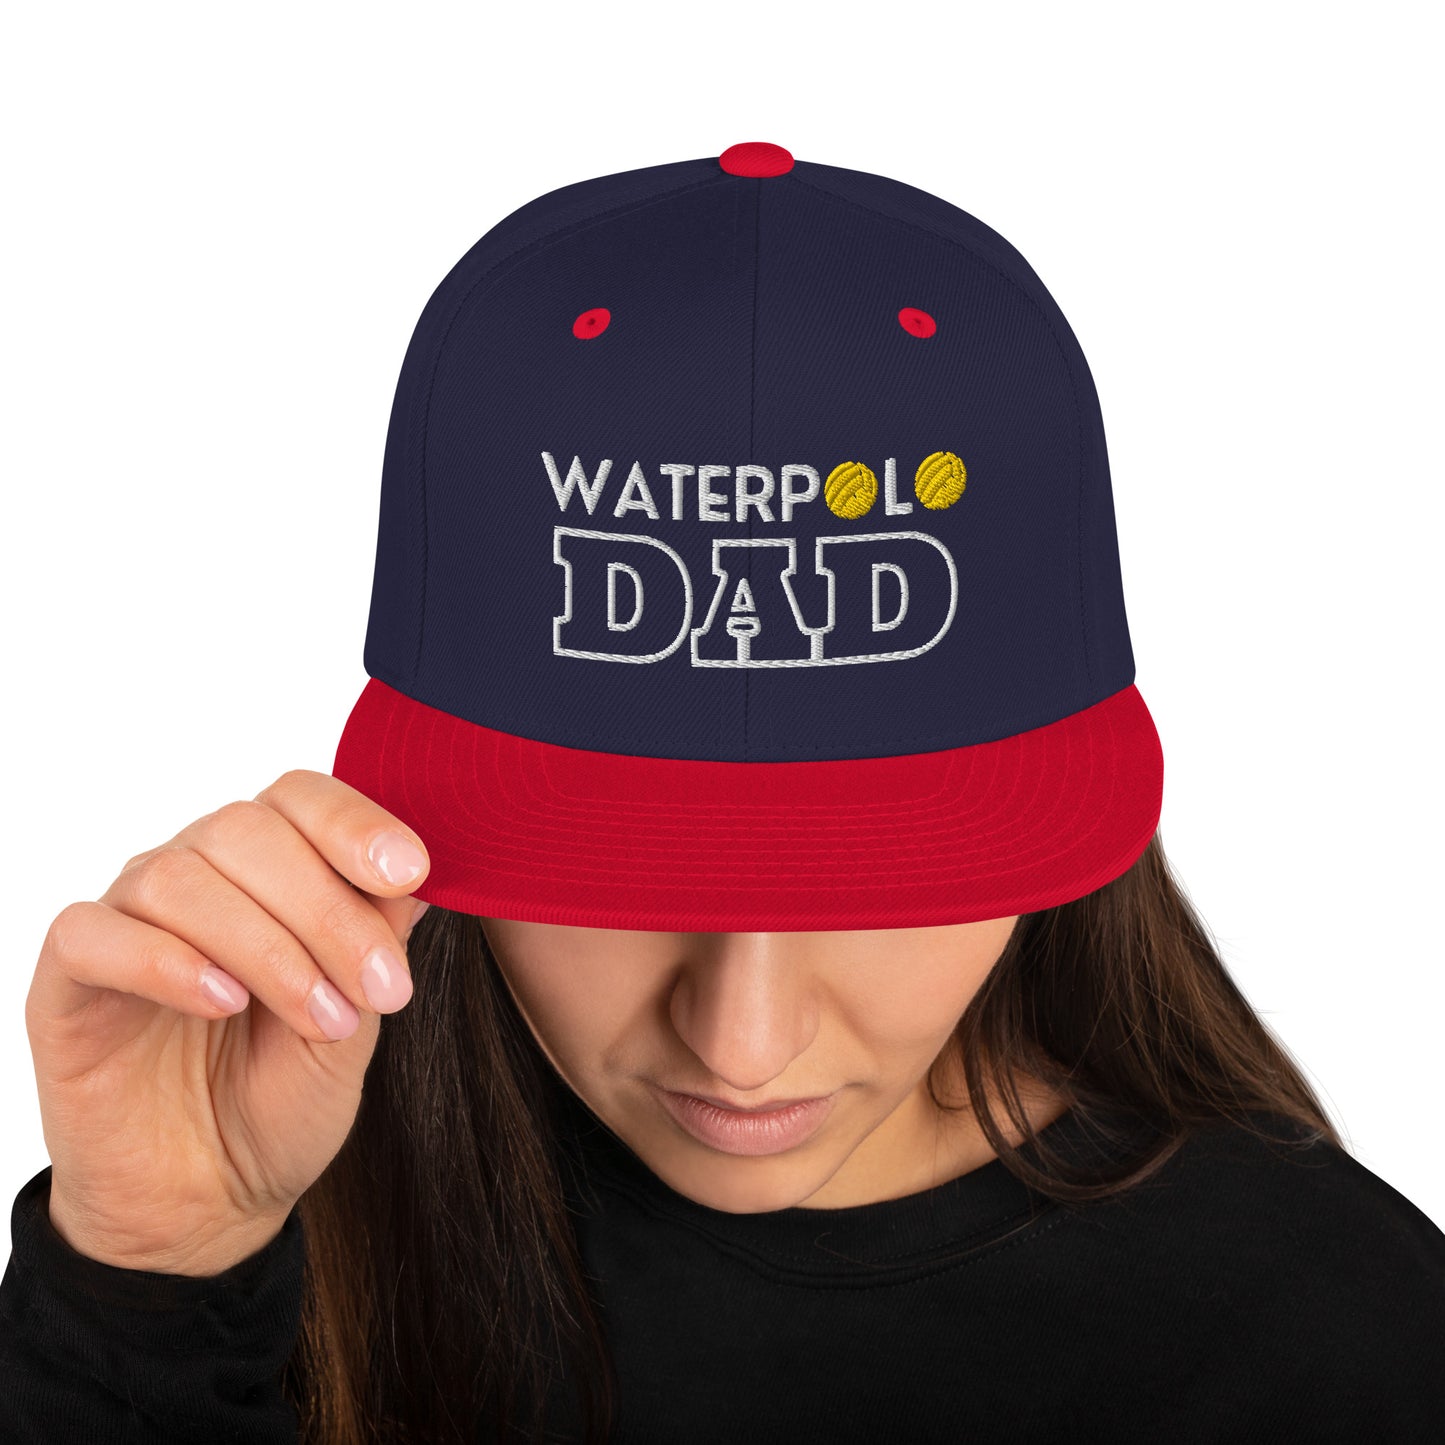 Waterpolo Dad - Classic Snapback | Yupoong 6089M